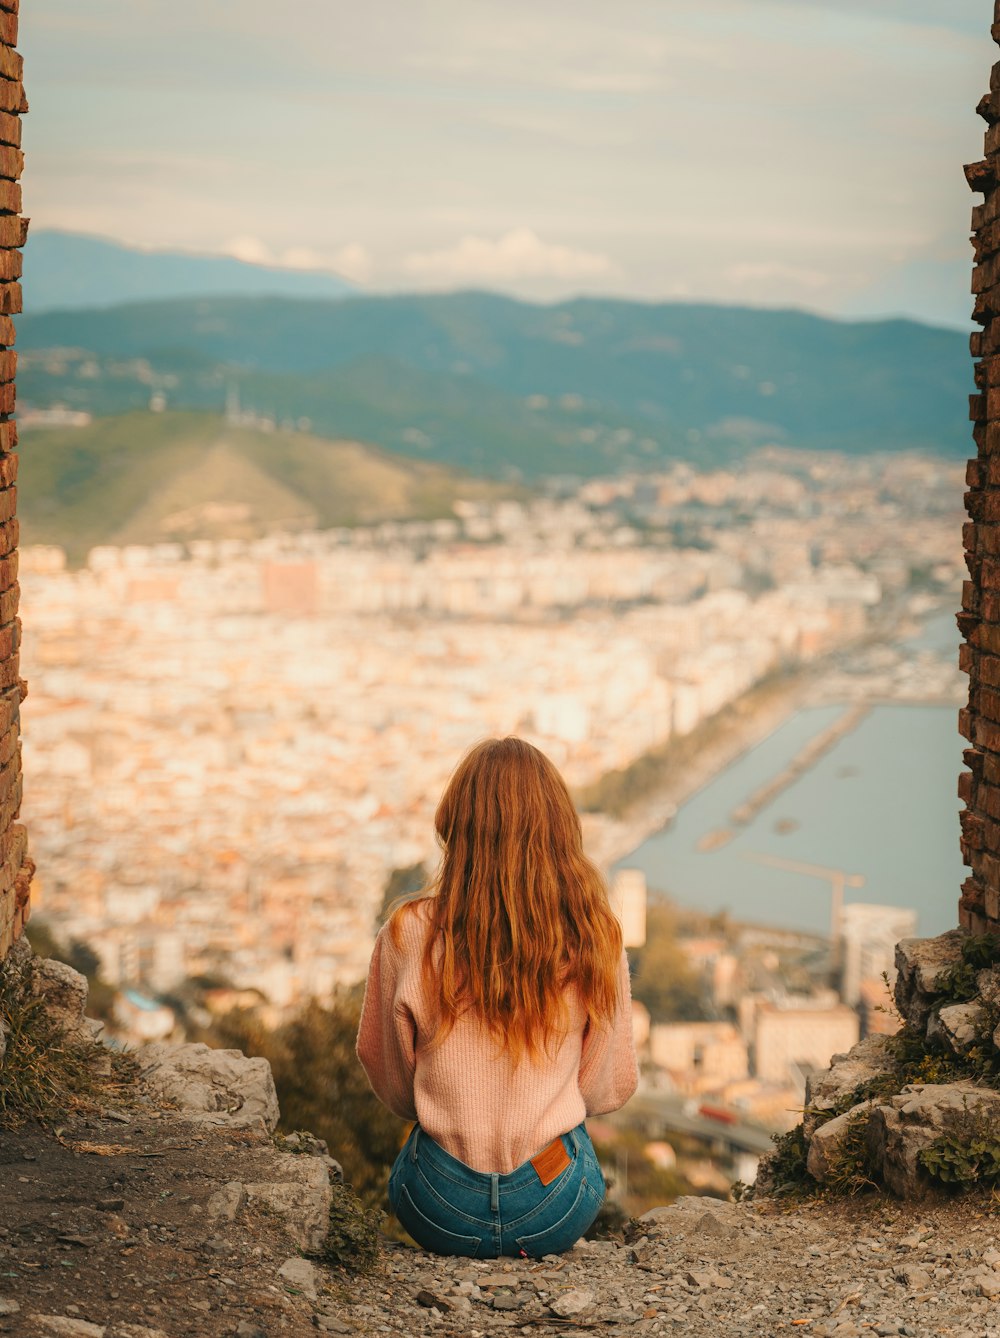 a woman sitting on a ledge looking out over a city